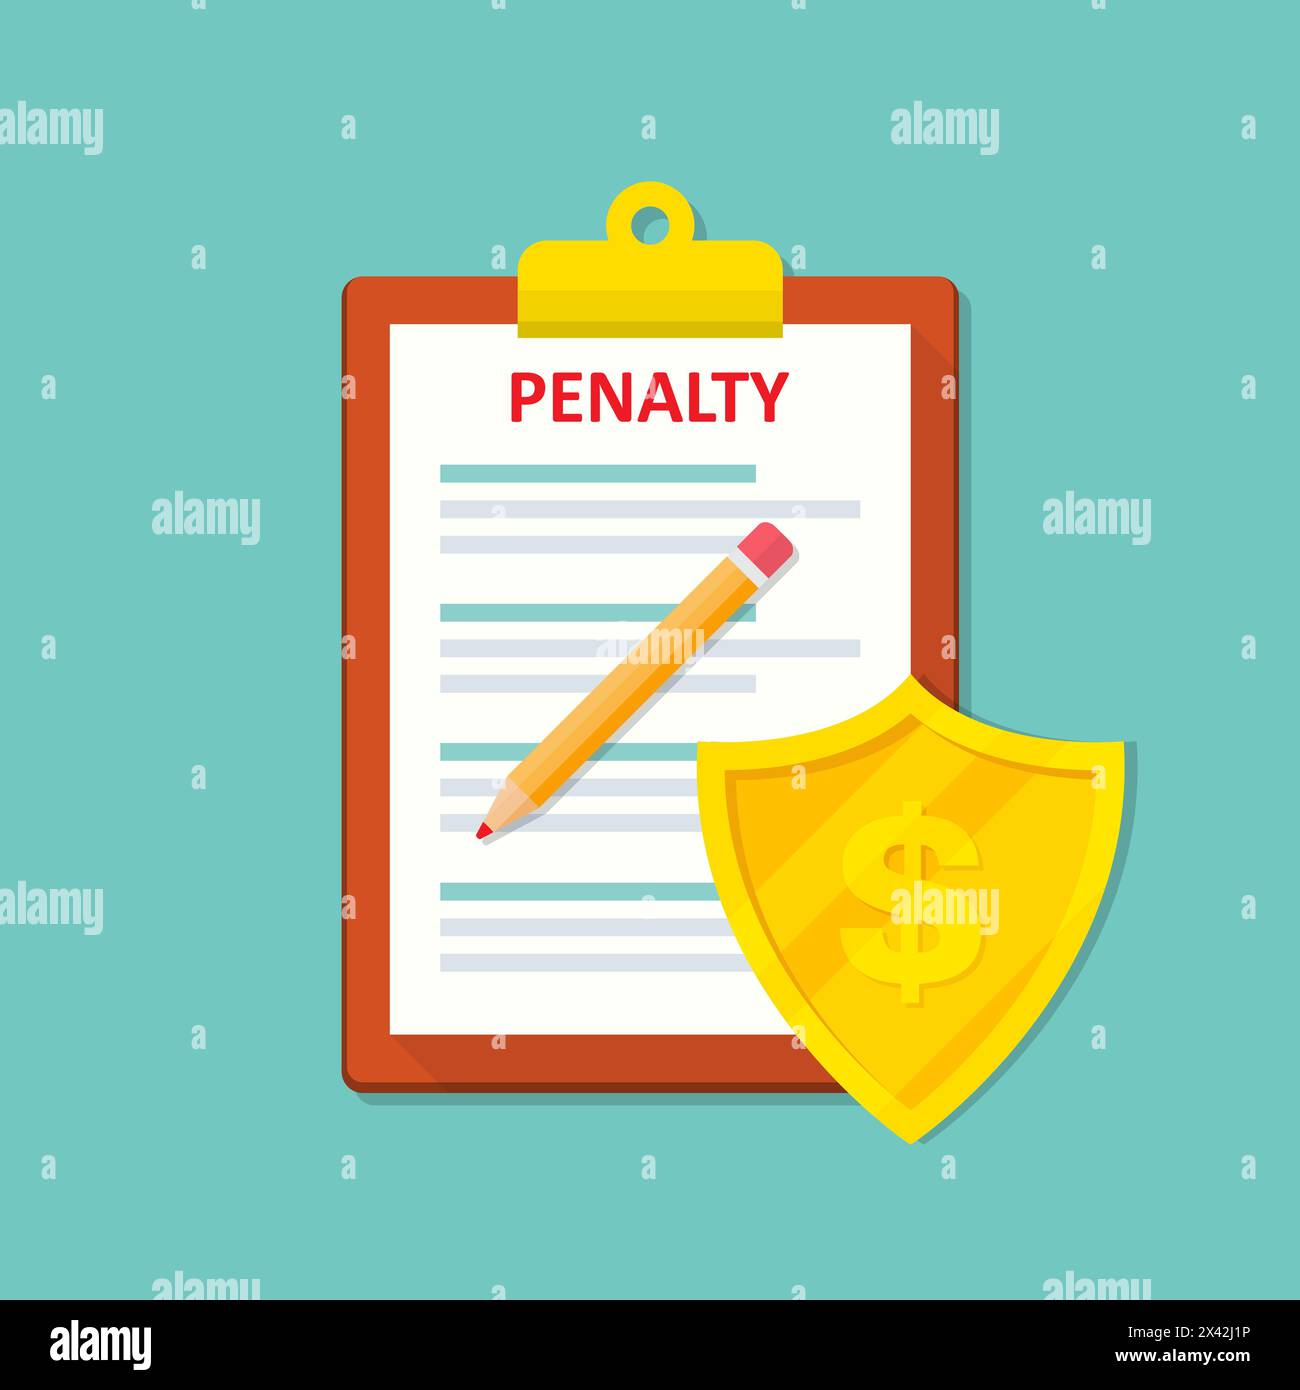 Penalty document icon with shield in a flat design. Vector illustration Stock Vector